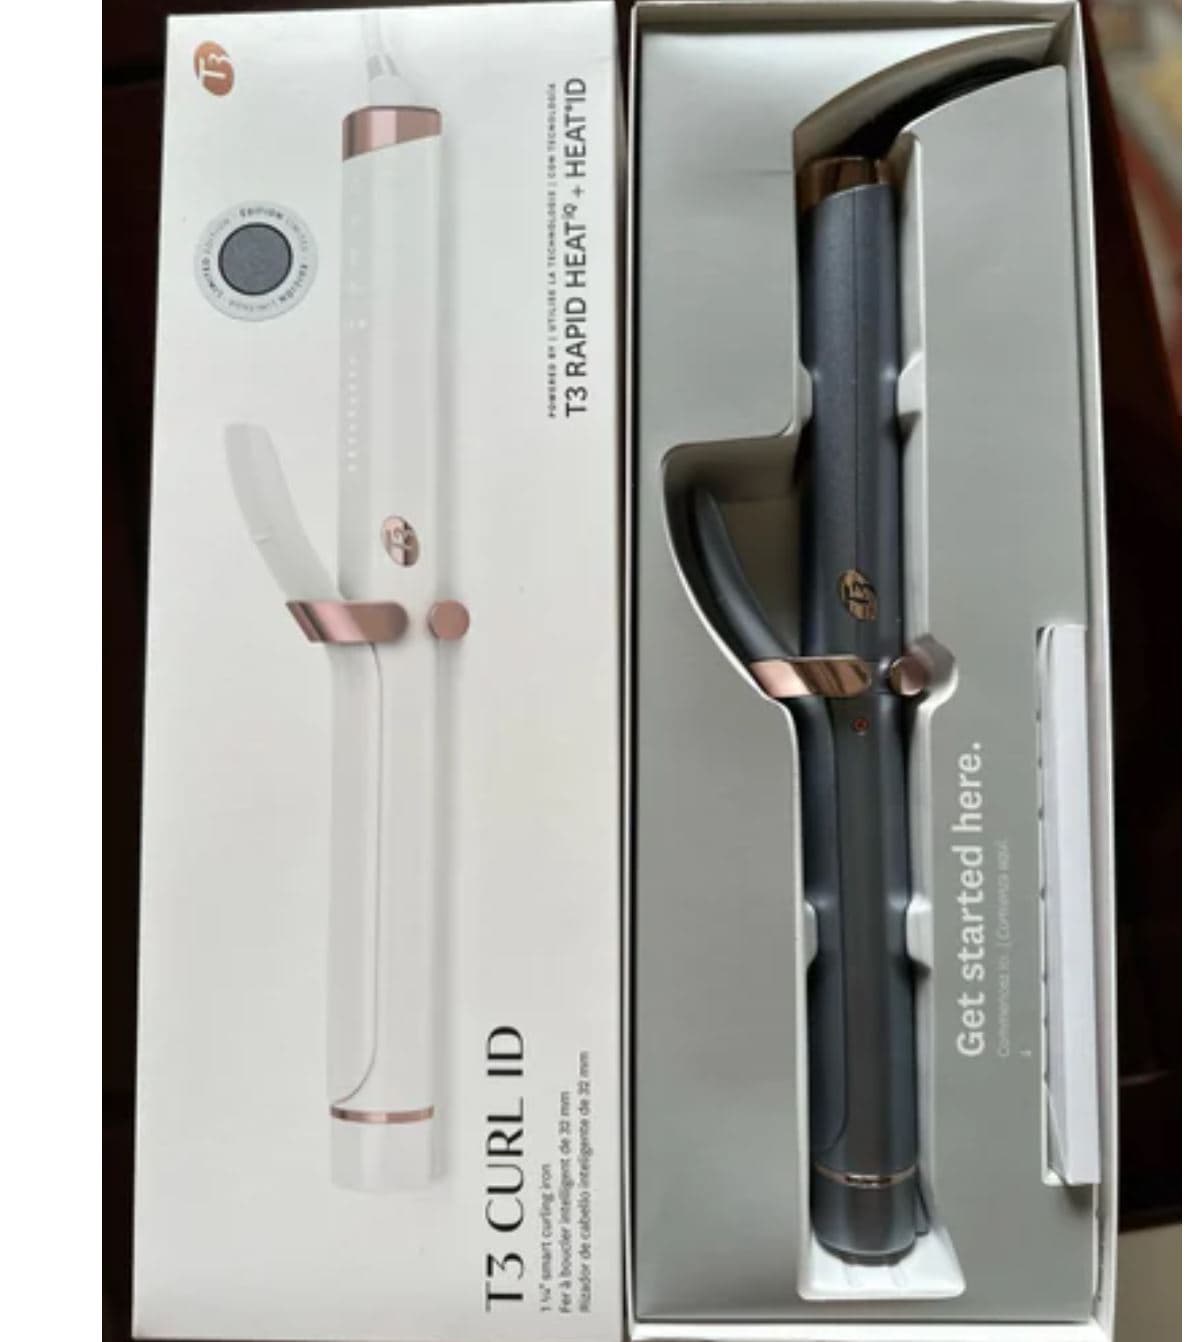 T3 Curl ID 1_25 Smart Curling Iron with Interactive Touch Interface